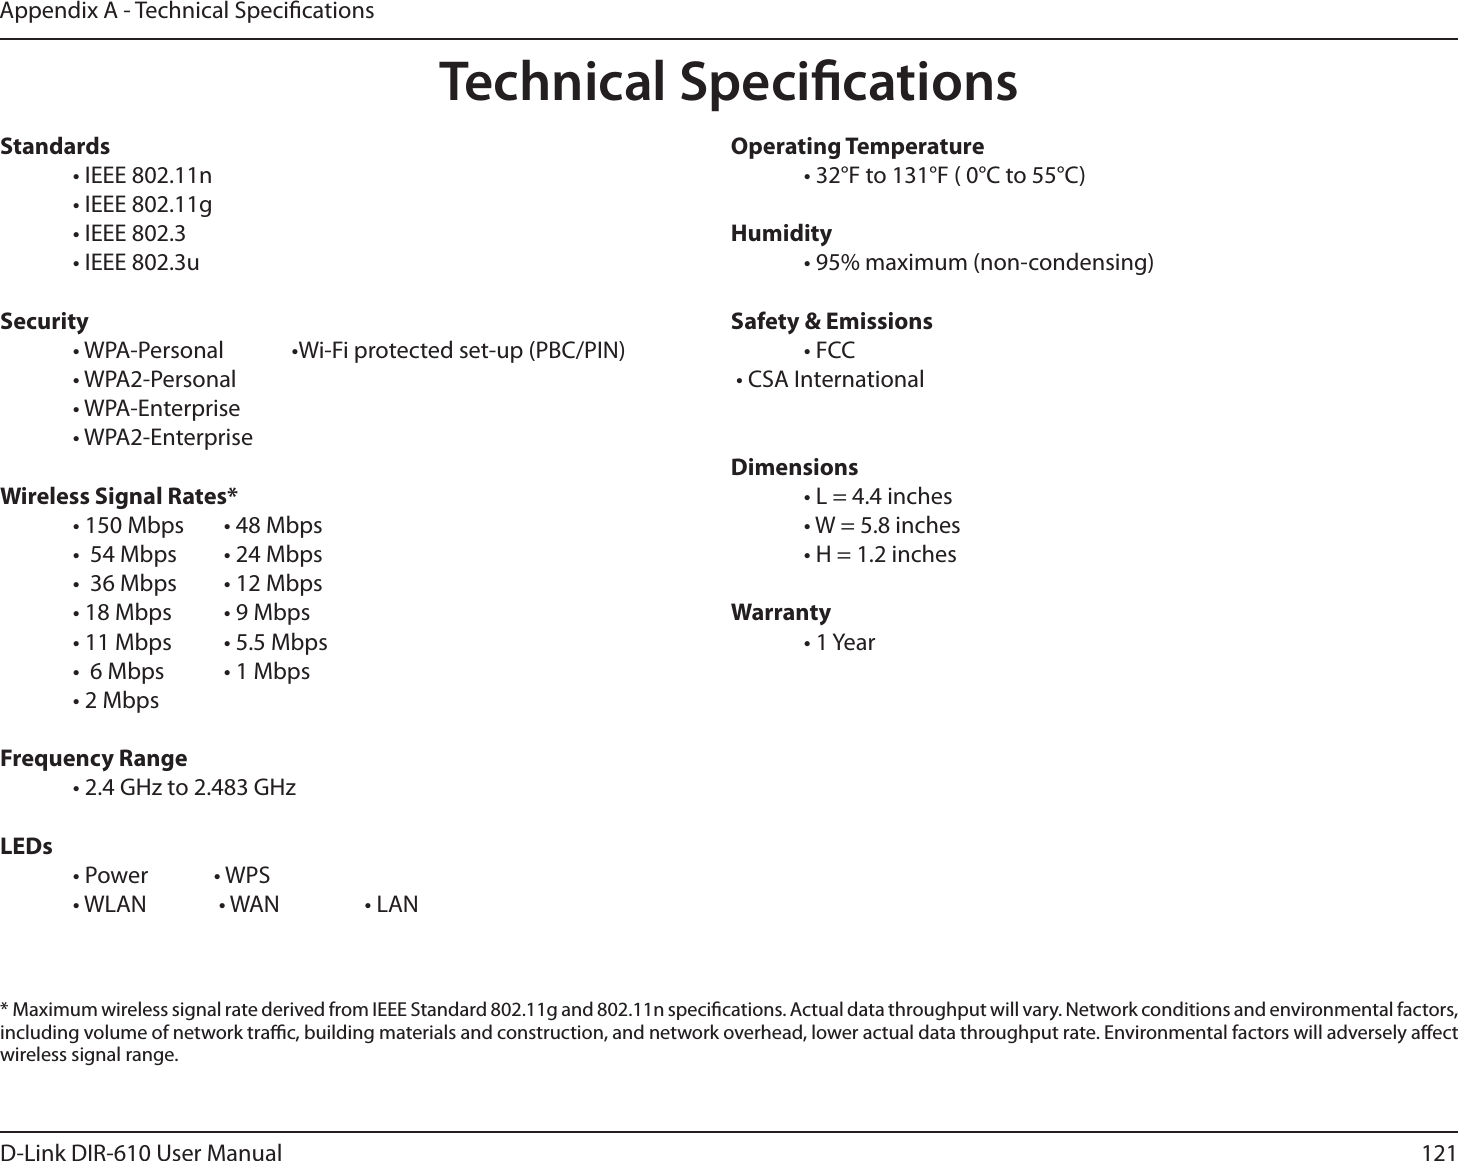 121D-Link DIR-610 User ManualAppendix A - Technical SpecicationsTechnical SpecicationsStandards  • IEEE 802.11n  • IEEE 802.11g  • IEEE 802.3  • IEEE 802.3uSecurity  • WPA-Personal  •Wi-Fi protected set-up (PBC/PIN) • WPA2-Personal • WPA-Enterprise • WPA2-Enterprise Wireless Signal Rates*  • 150 Mbps   • 48 Mbps   •  54 Mbps    • 24 Mbps   •  36 Mbps    • 12 Mbps   • 18 Mbps    • 9 Mbps   • 11 Mbps    • 5.5 Mbps   •  6 Mbps    • 1 Mbps   • 2 Mbps      Frequency Range  • 2.4 GHz to 2.483 GHzLEDs  • Power   • WPS  • WLAN   • WAN    • LANOperating Temperature  • 32°F to 131°F ( 0°C to 55°C)Humidity  • 95% maximum (non-condensing)Safety &amp; Emissions • FCC t$4&quot;*OUFSOBUJPOBM Dimensions  • L = 4.4 inches  • W = 5.8 inches  • H = 1.2 inchesWarranty • 1 Year*  Maximum wireless signal rate derived from IEEE Standard 802.11g and 802.11n specications. Actual data throughput will vary. Network conditions and environmental factors, including volume of network trac, building materials and construction, and network overhead, lower actual data throughput rate. Environmental factors will adversely aect wireless signal range.